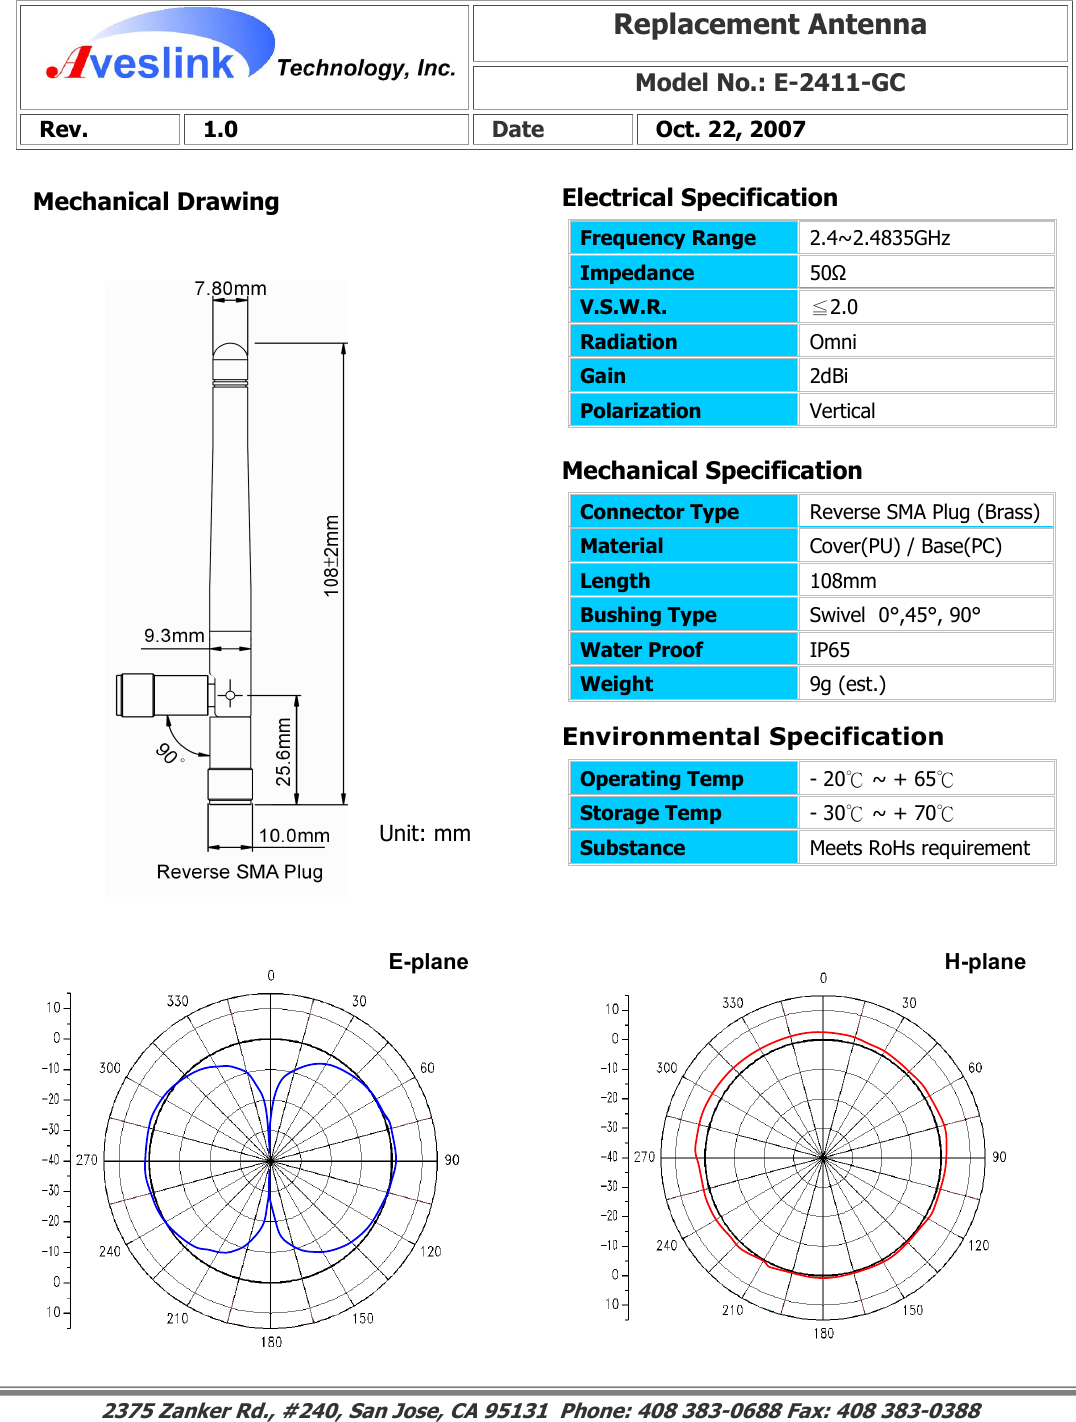 Mechanical DrawingMechanical Specification Environmental SpecificationReplacement Antenna Model No.: E-2411-GC Rev.   1.0   Date   Oct. 22, 2007 Connector Type   Reverse SMA Plug (Brass)Material  Cover(PU) / Base(PC) Length  108mm Bushing Type  Swivel  0°,45°, 90° Water Proof  IP65 Weight  9g (est.)                                                                                                                                                                                                                        2375 Zanker Rd., #240, San Jose, CA 95131  Phone: 408 383-0688 Fax: 408 383-0388 Operating Temp  - 20℃ ~ + 65℃  Storage Temp  - 30℃ ~ + 70℃  Substance  Meets RoHs requirement Electrical SpecificationFrequency Range   2.4~2.4835GHz Impedance  50Ω V.S.W.R.  ≦2.0 Radiation  Omni Gain  2dBi Polarization  Vertical Unit: mm E-plane  H-plane 